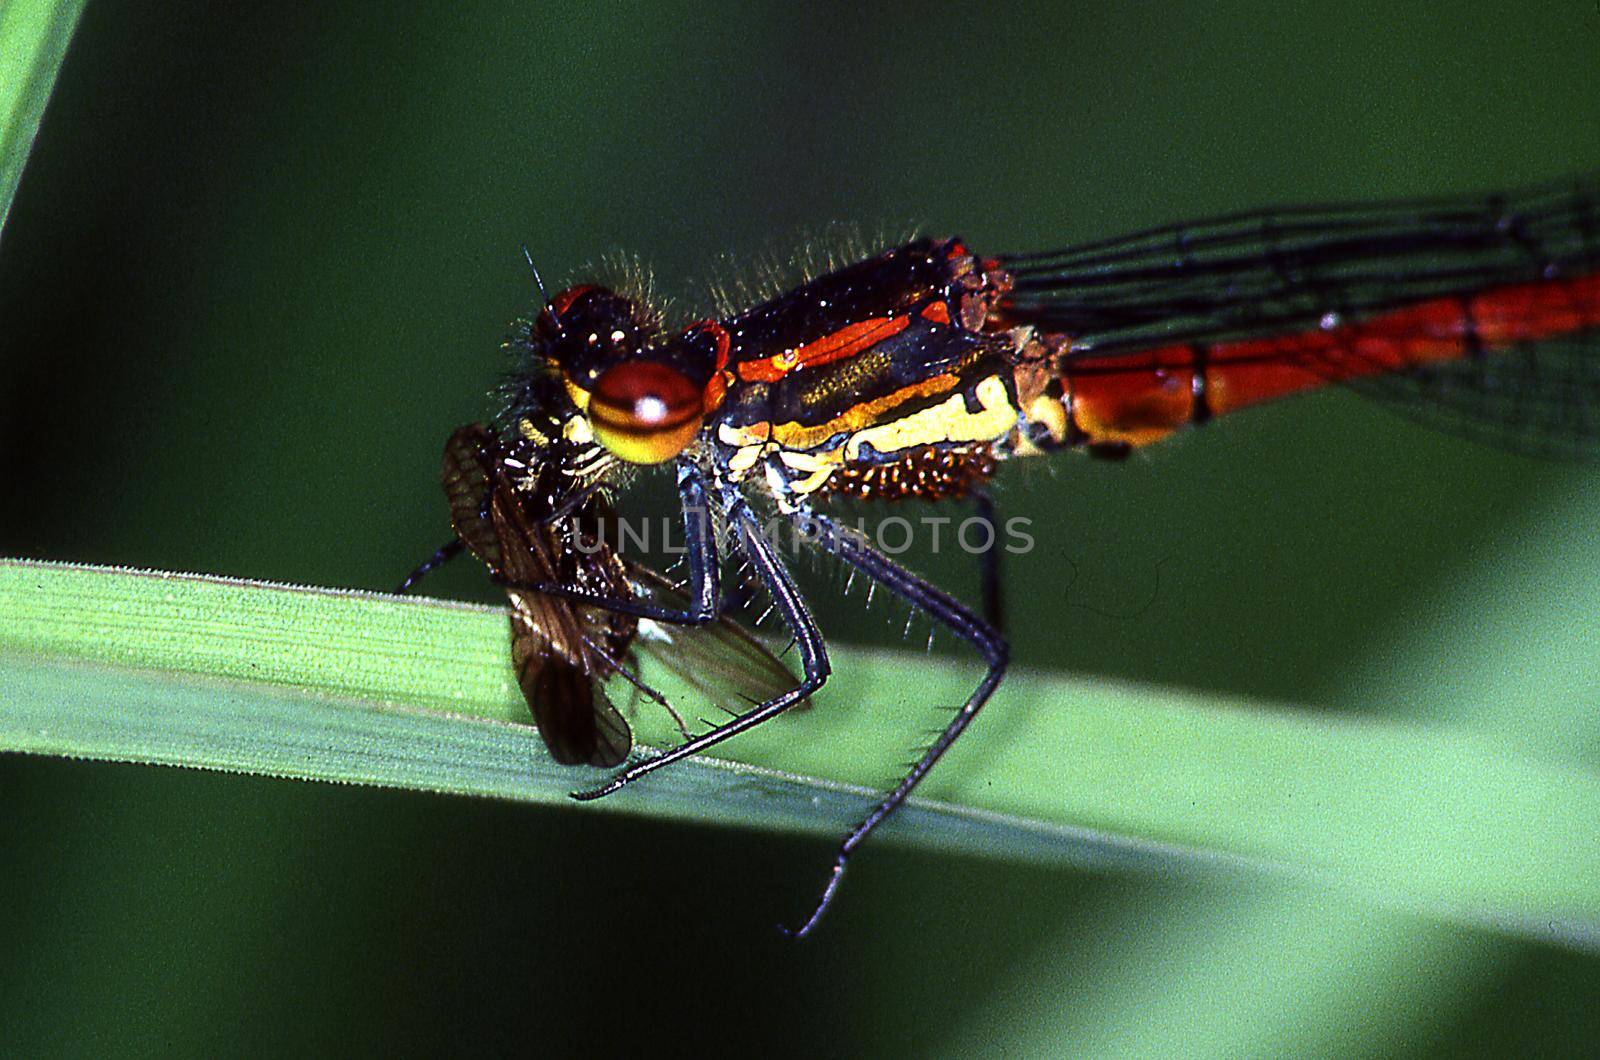 Adoni's dragonfly eats fly on a blade of grass